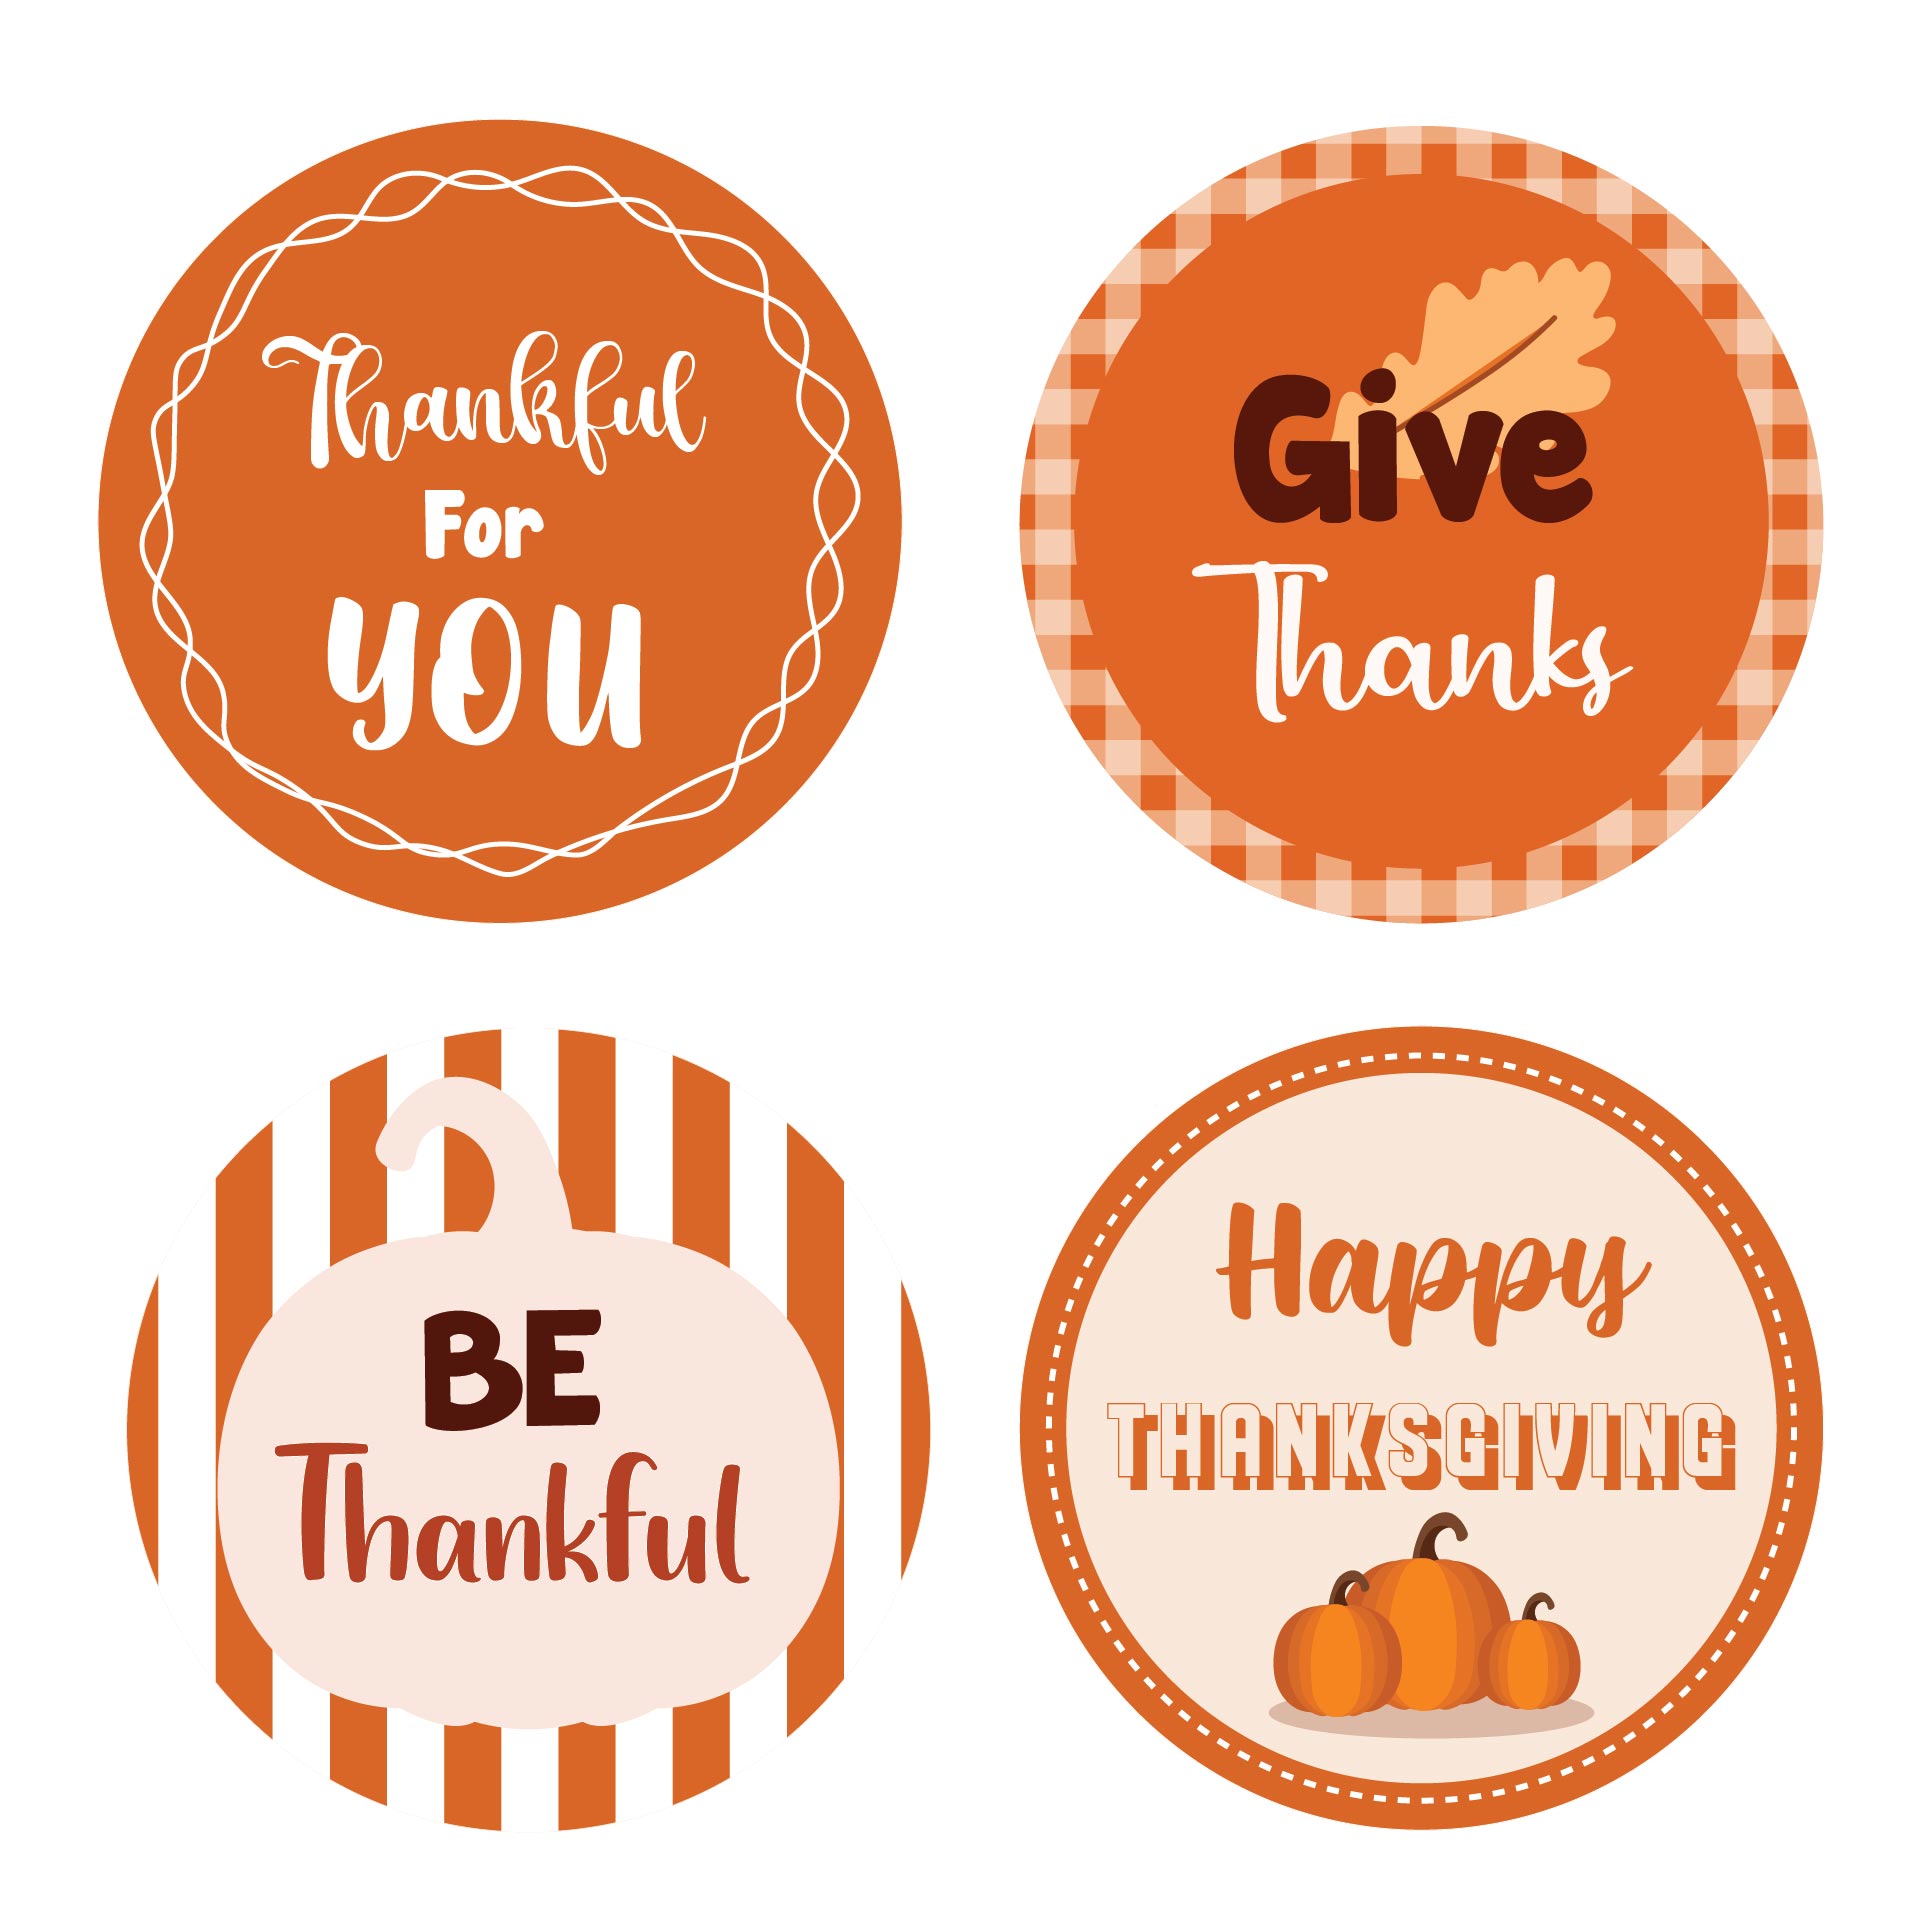 7 Best Images of Happy Thanksgiving Free Printable Tags Happy